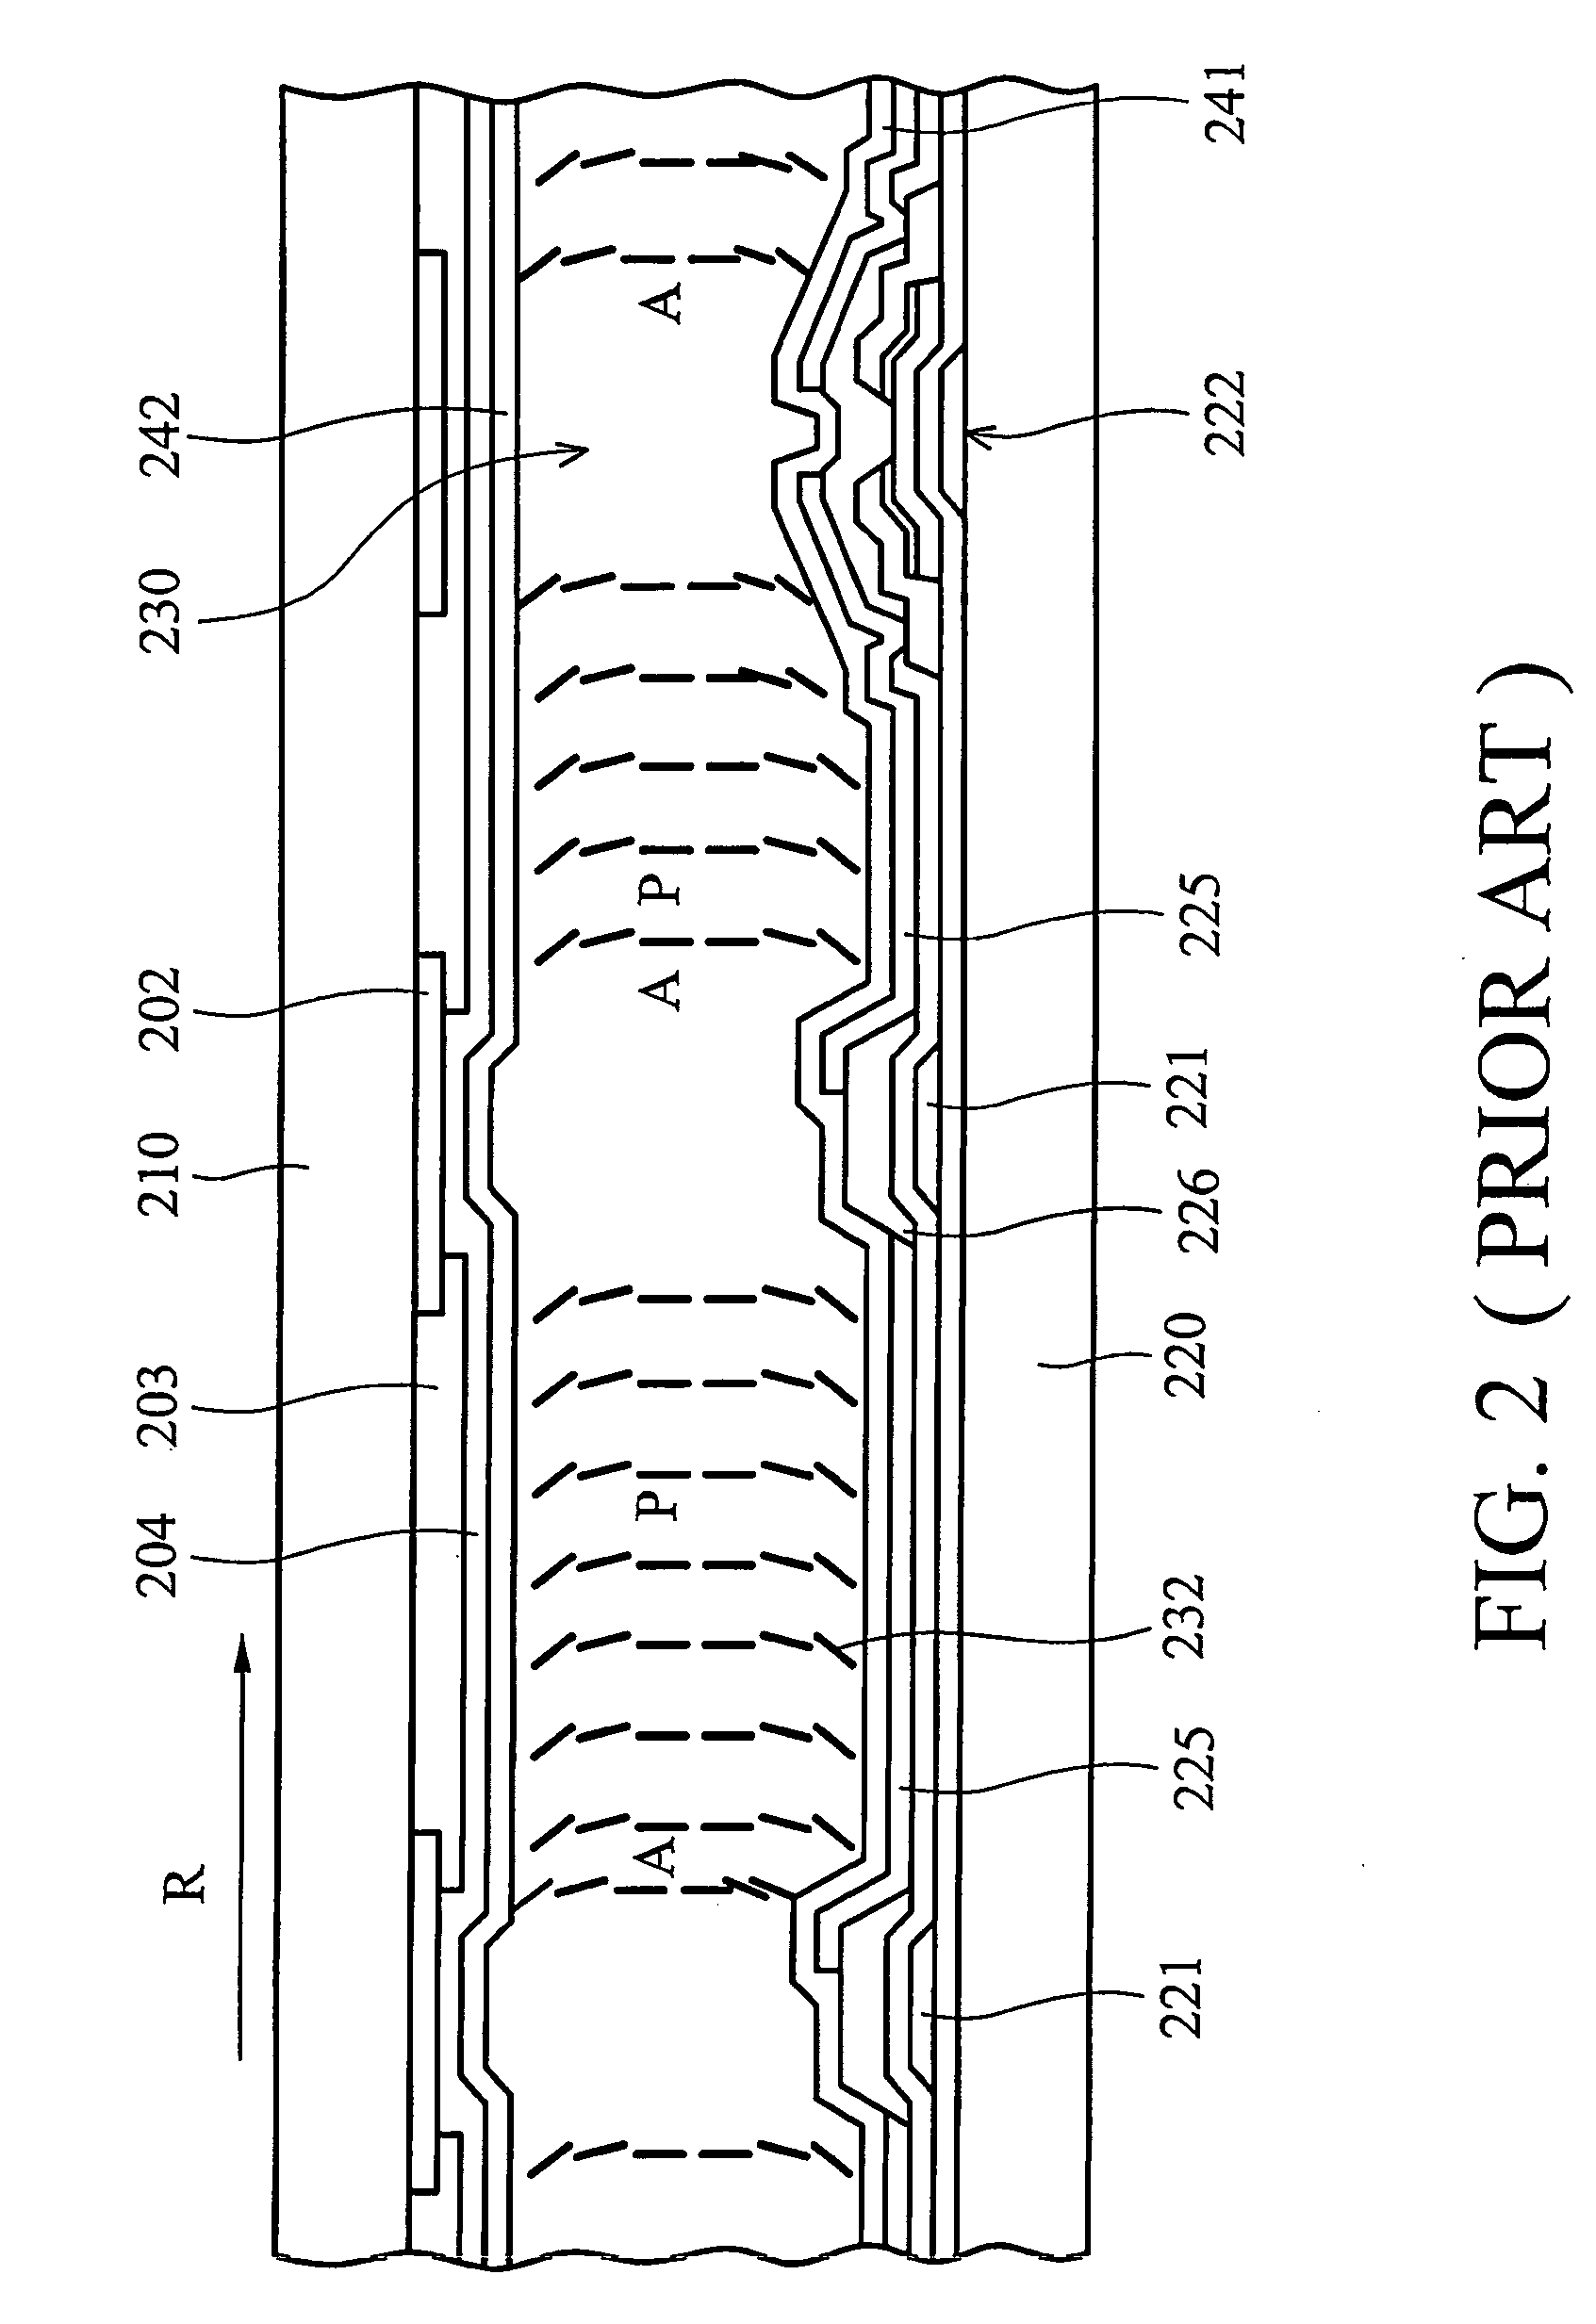 Optically compensated bend mode liquid crystal display devices